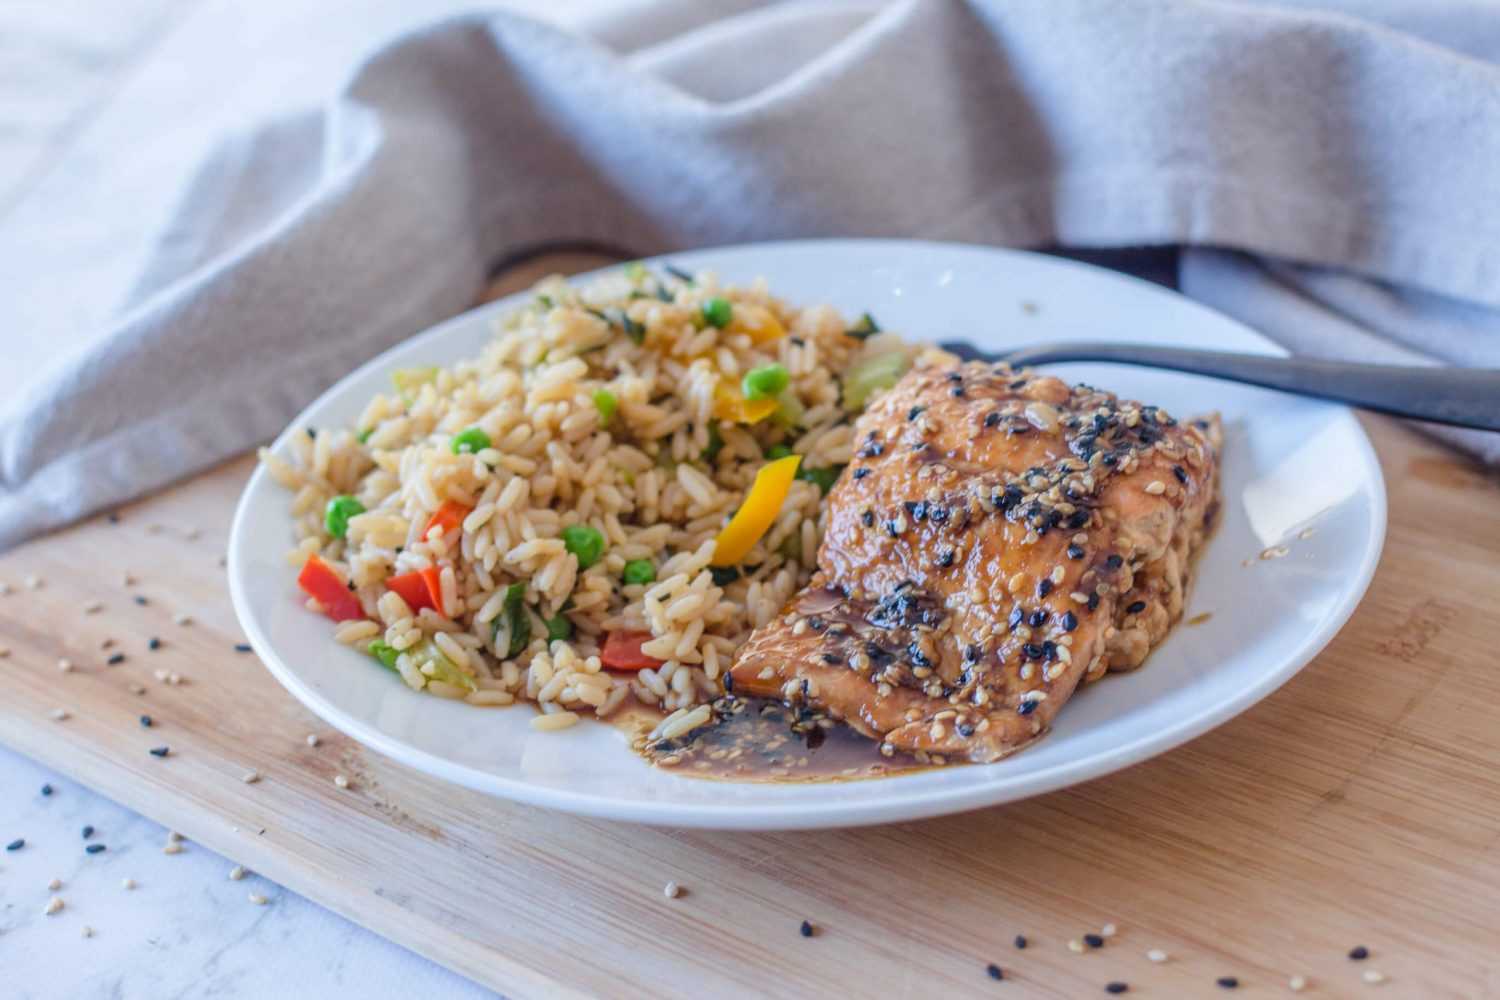 Salmon fillet topped with spices alongside rice and chopped vegetables